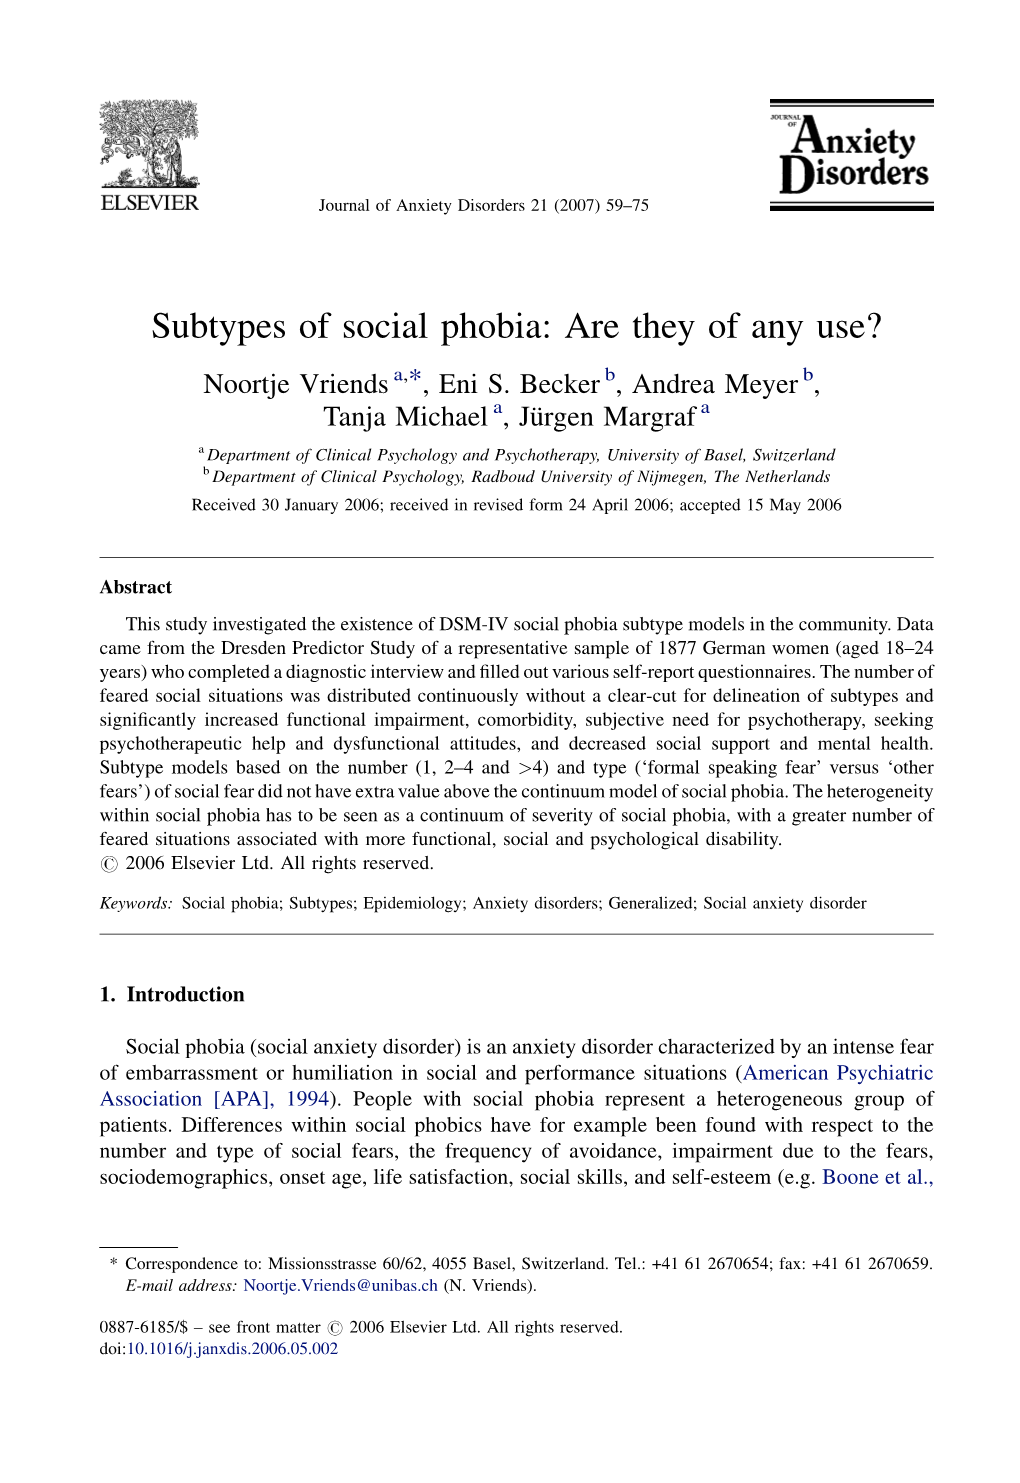 Subtypes of Social Phobia: Are They of Any Use? Noortje Vriends A,*, Eni S